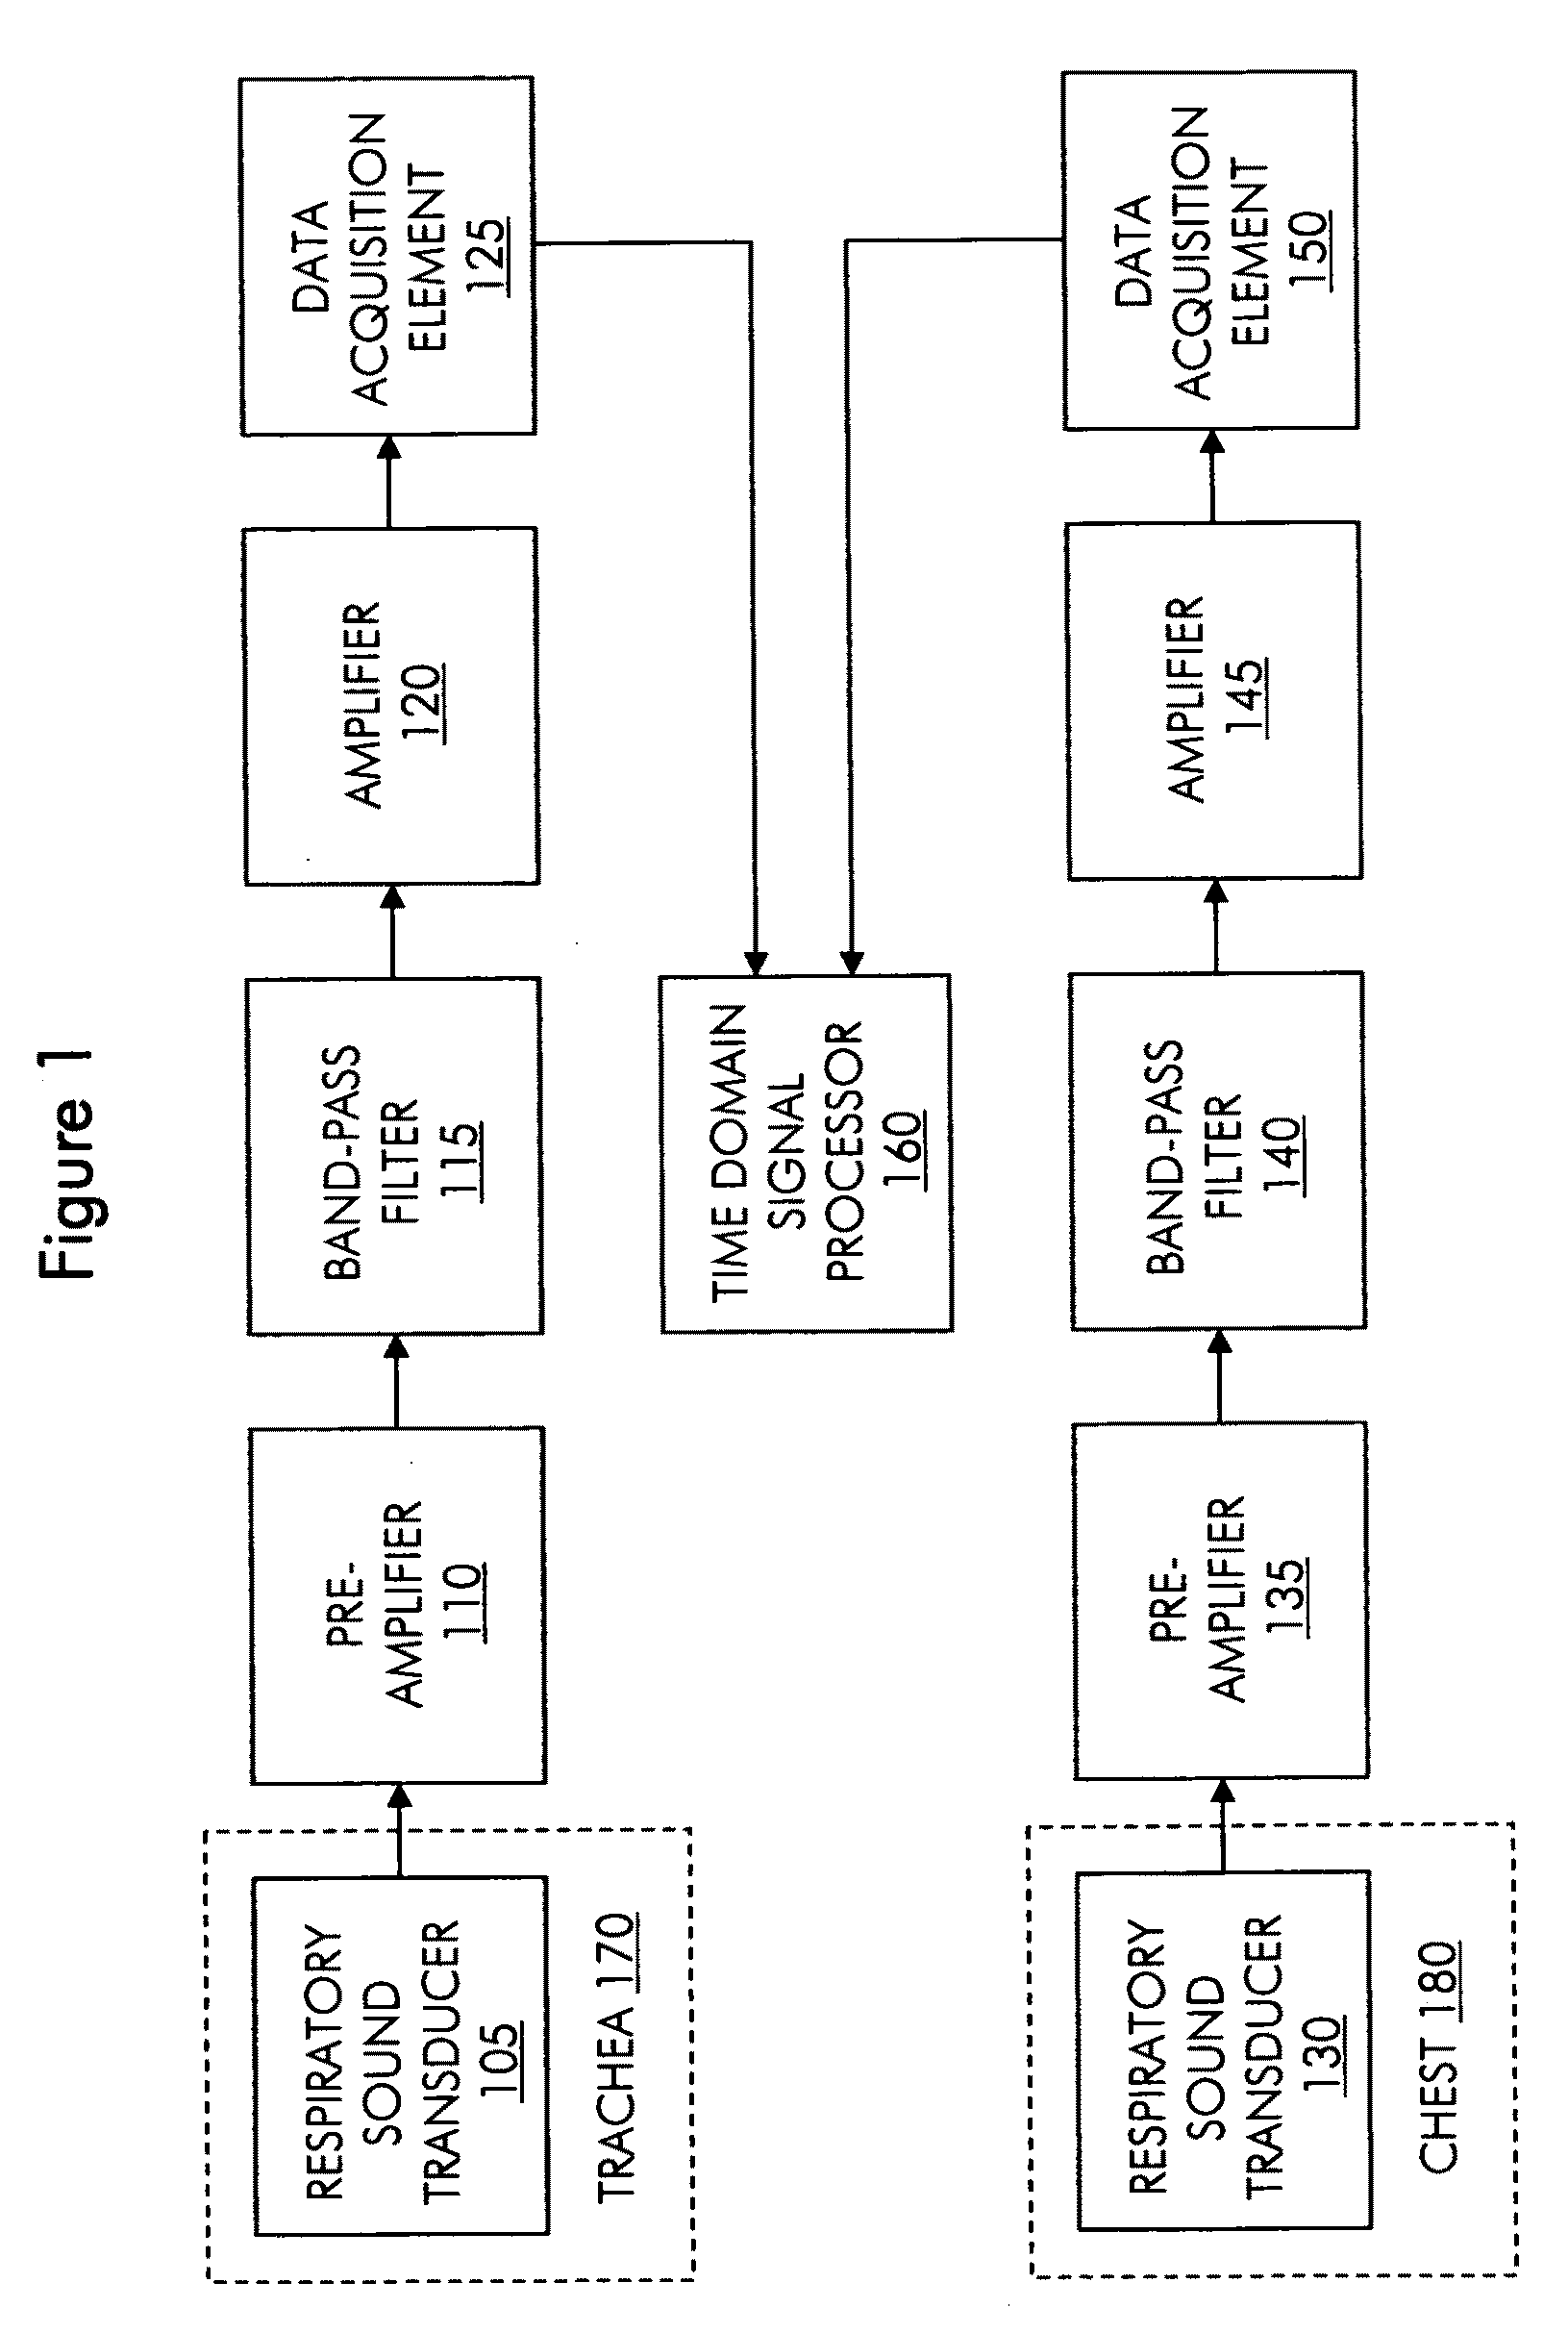 Respiratory signal detection and time domain signal processing method and system